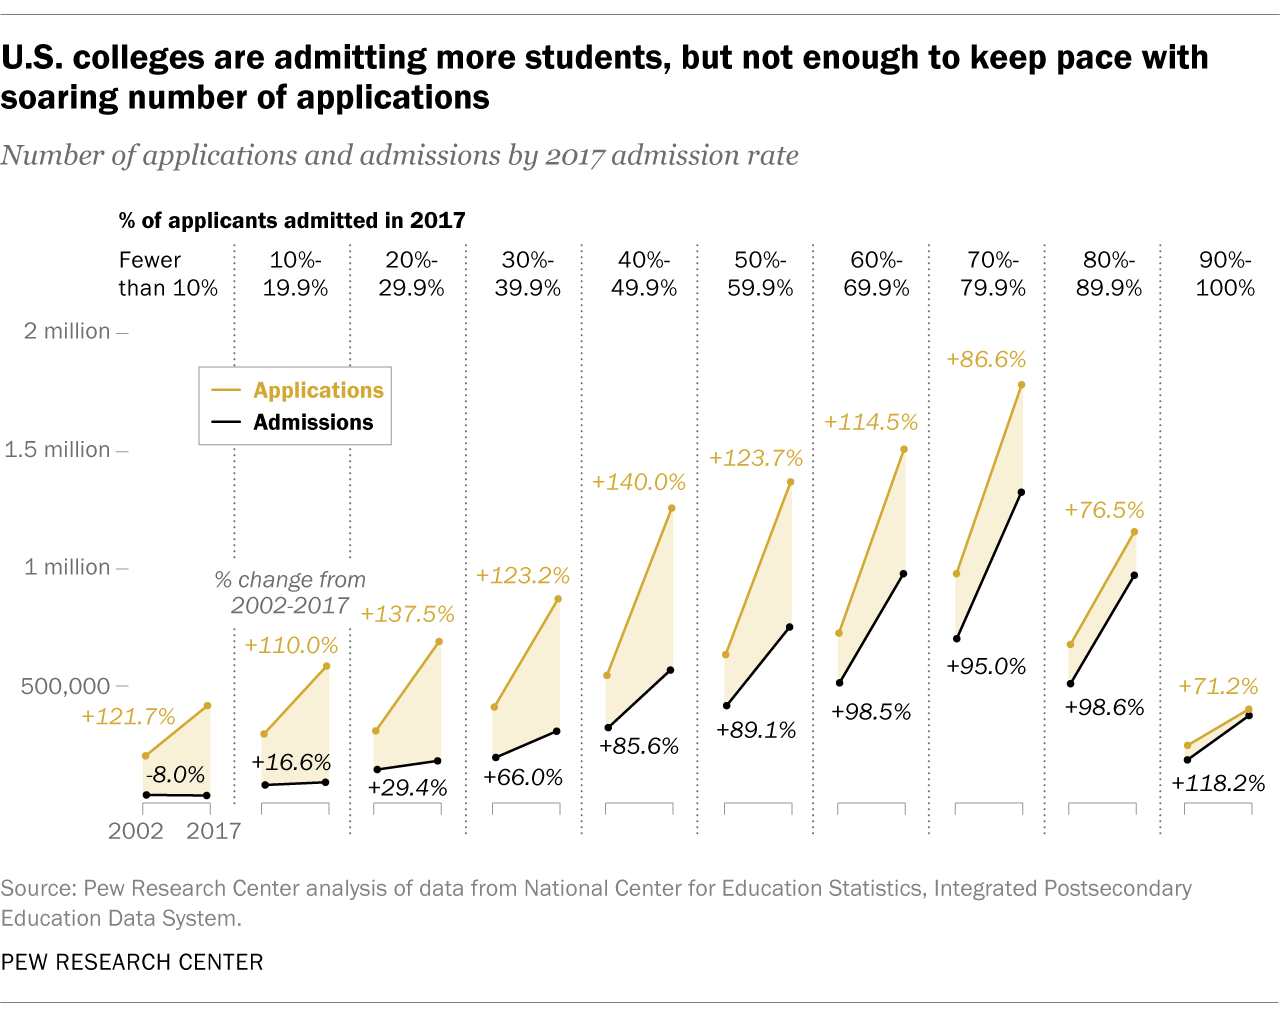 U.S. colleges are admitting more students, but not enough to keep pace with soaring number of applications